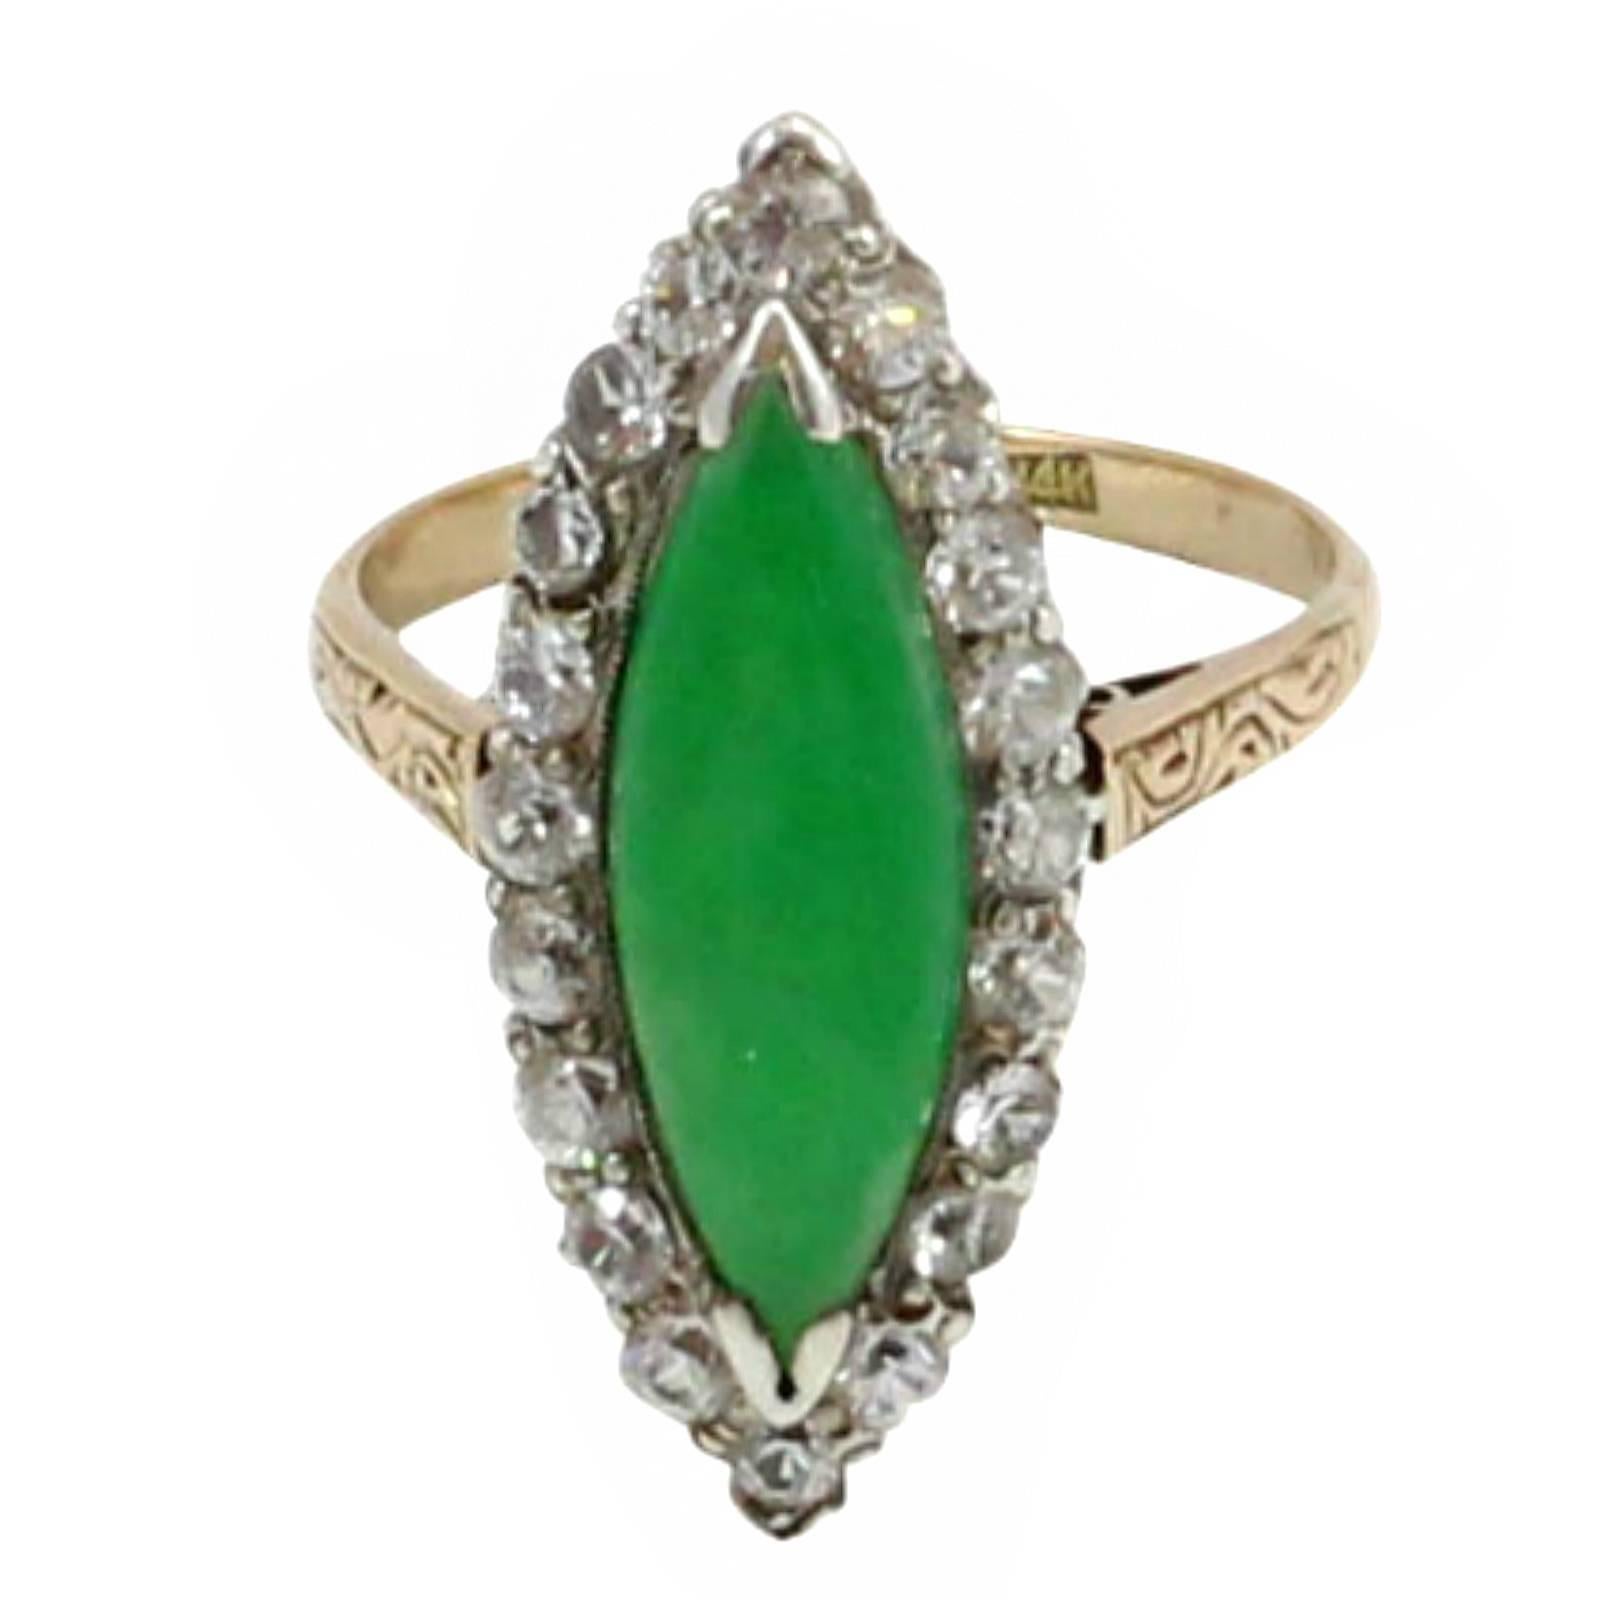 A handmade 14 karat gold ring, with a 1.95mm to 2.64mm wide rounded tapered shank and flow up engraved shoulders. The white gold cluster head contains one 18mm x 6.35mm marquise cabochon cut A Grade jadeite. It is surrounded by twenty 2.25mm